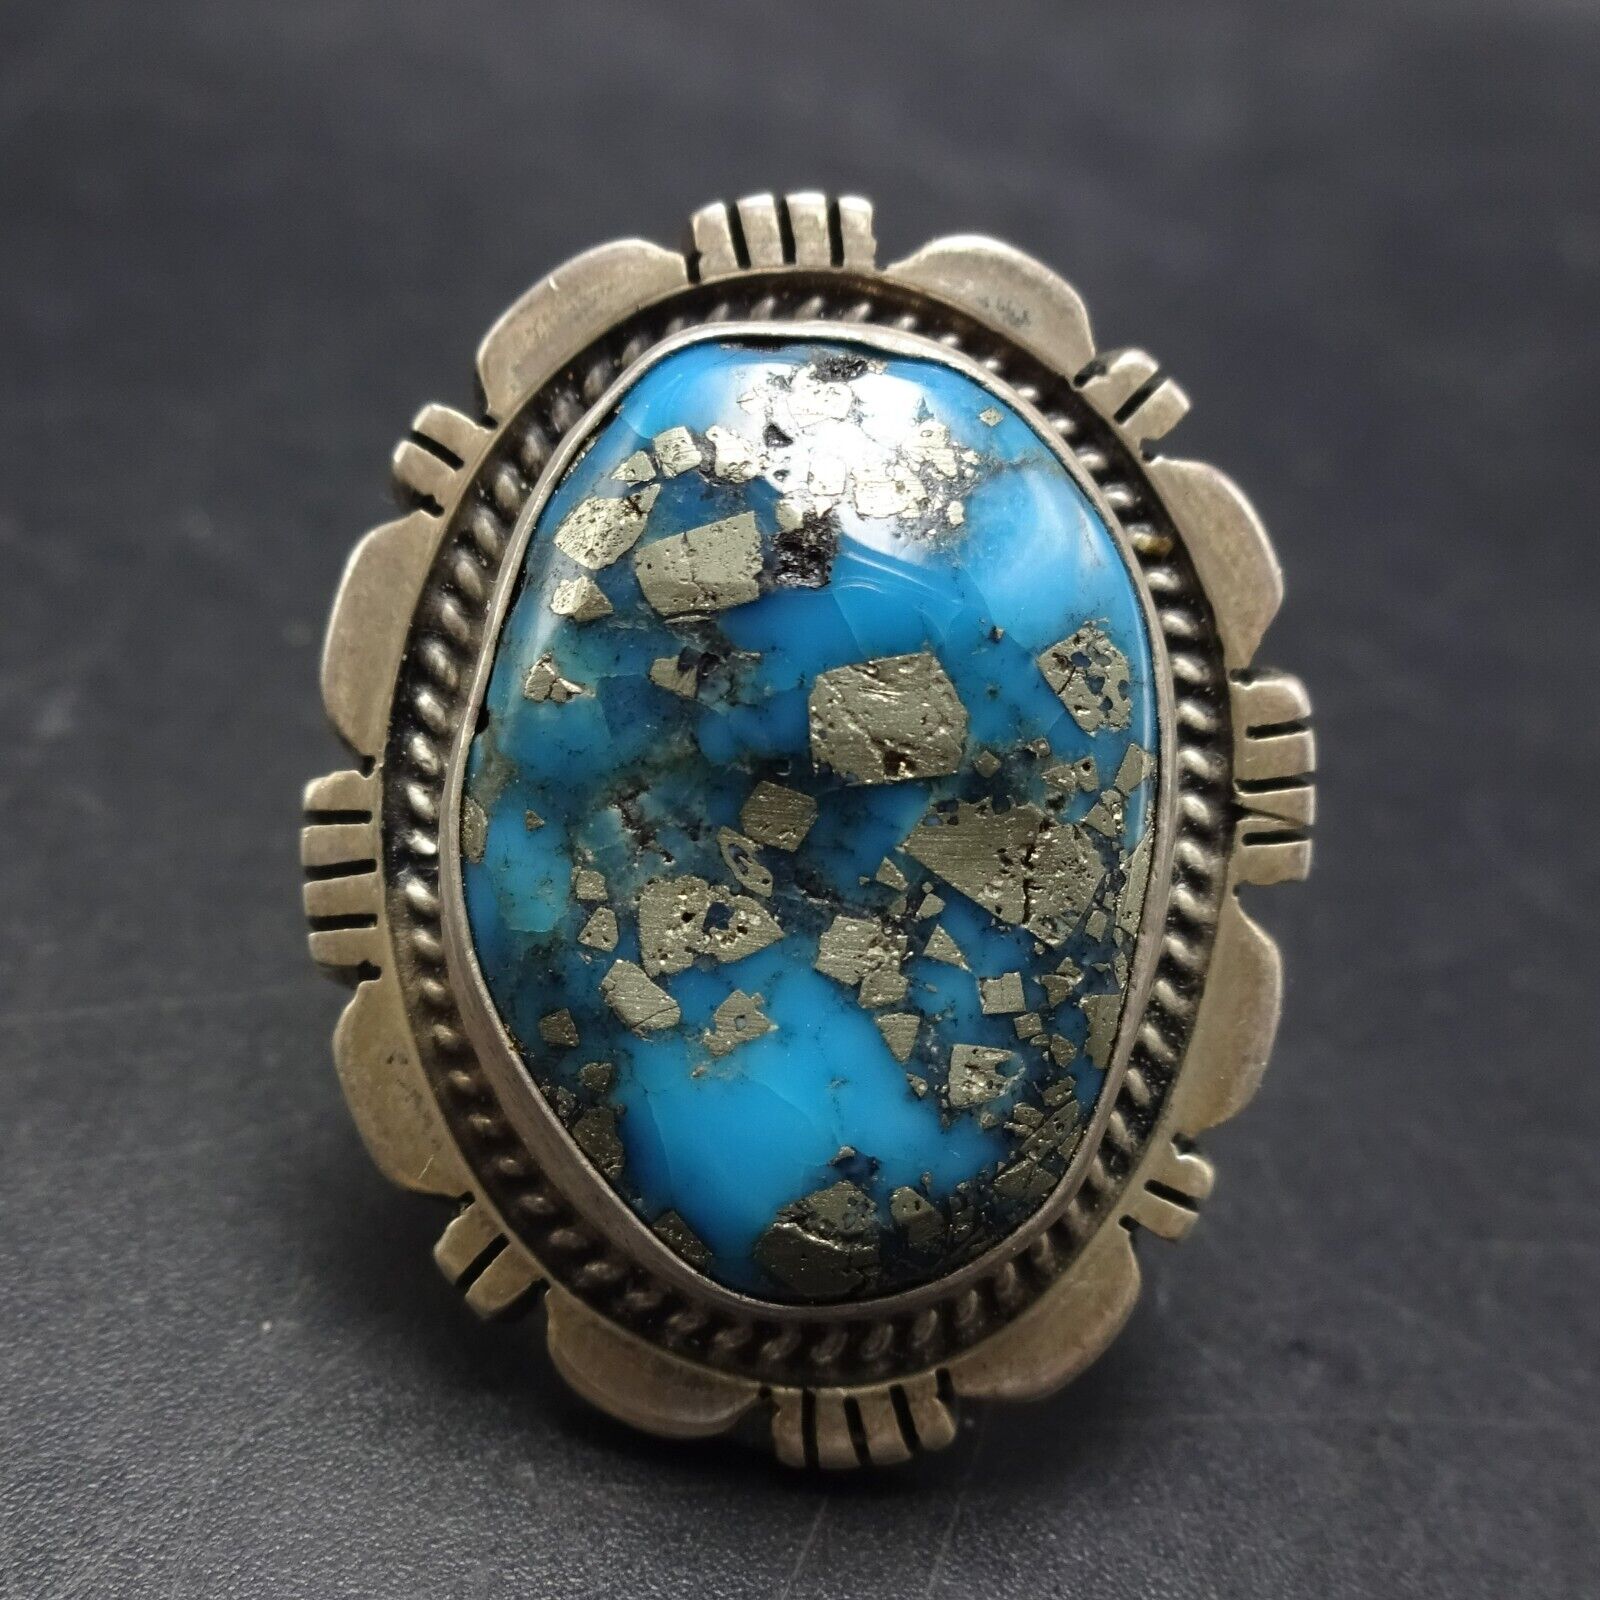 Vintage P.A. SMITH Navajo HIGH BLUE MORENCI TURQUOISE SterlingSilver RING size 8